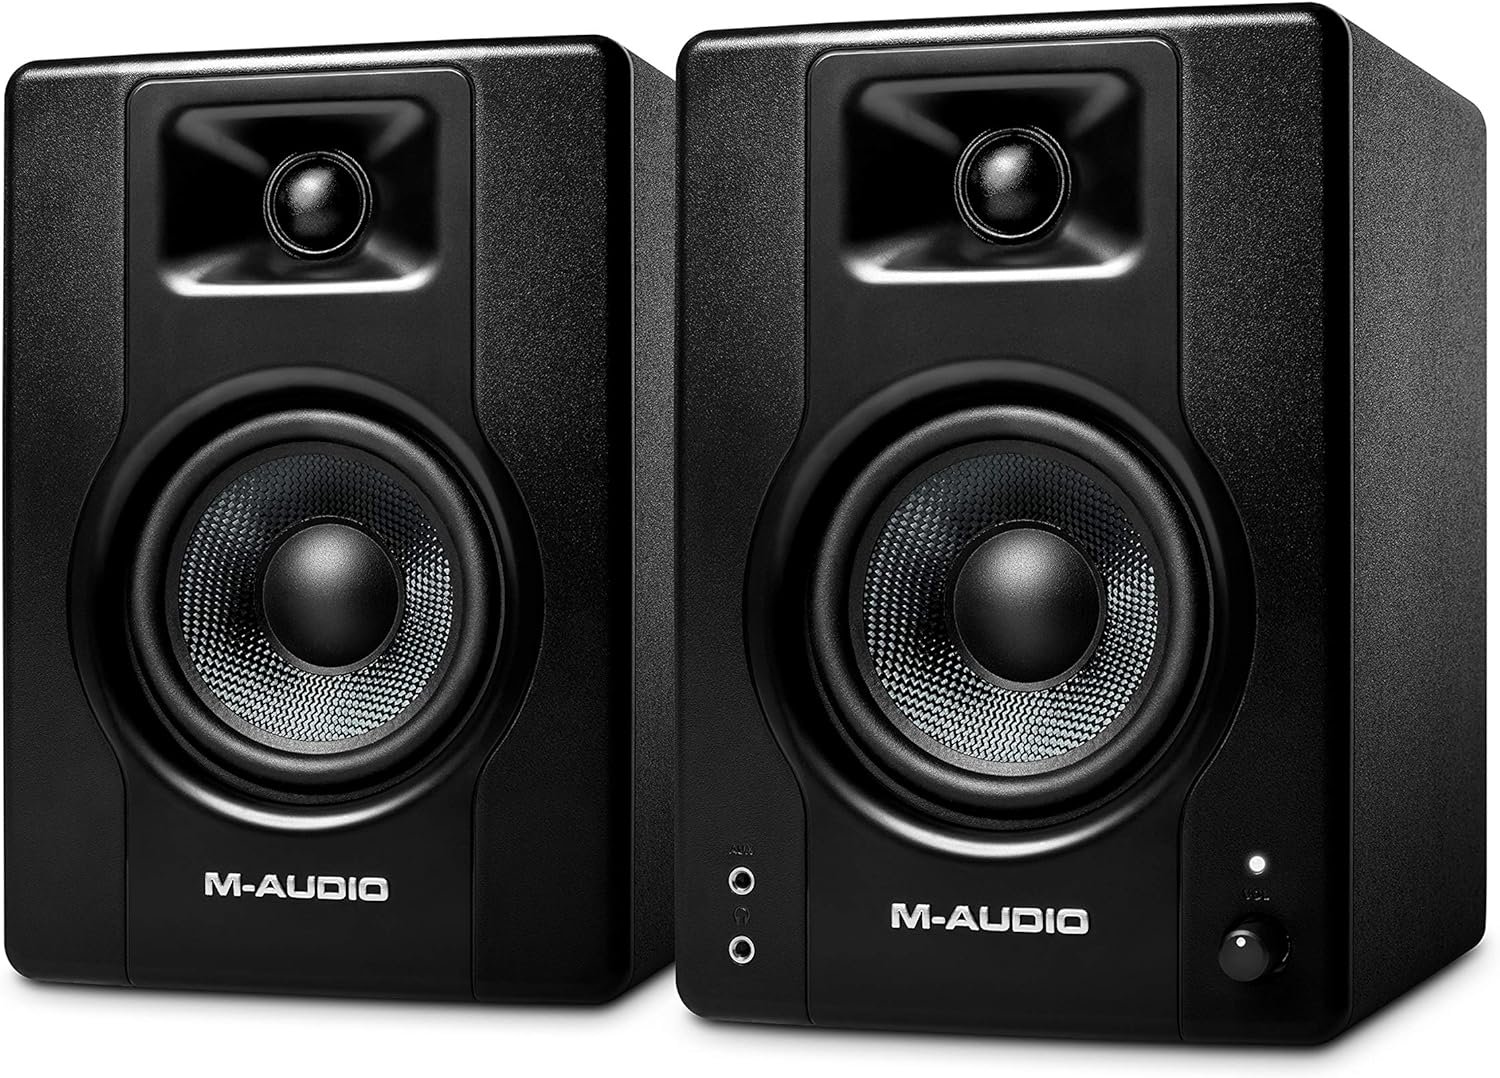 M-Audio BX4 4.5 Studio Monitors, HD PC Speakers for Recording and Multimedia with Music Production Software, 120W, Pair, Black